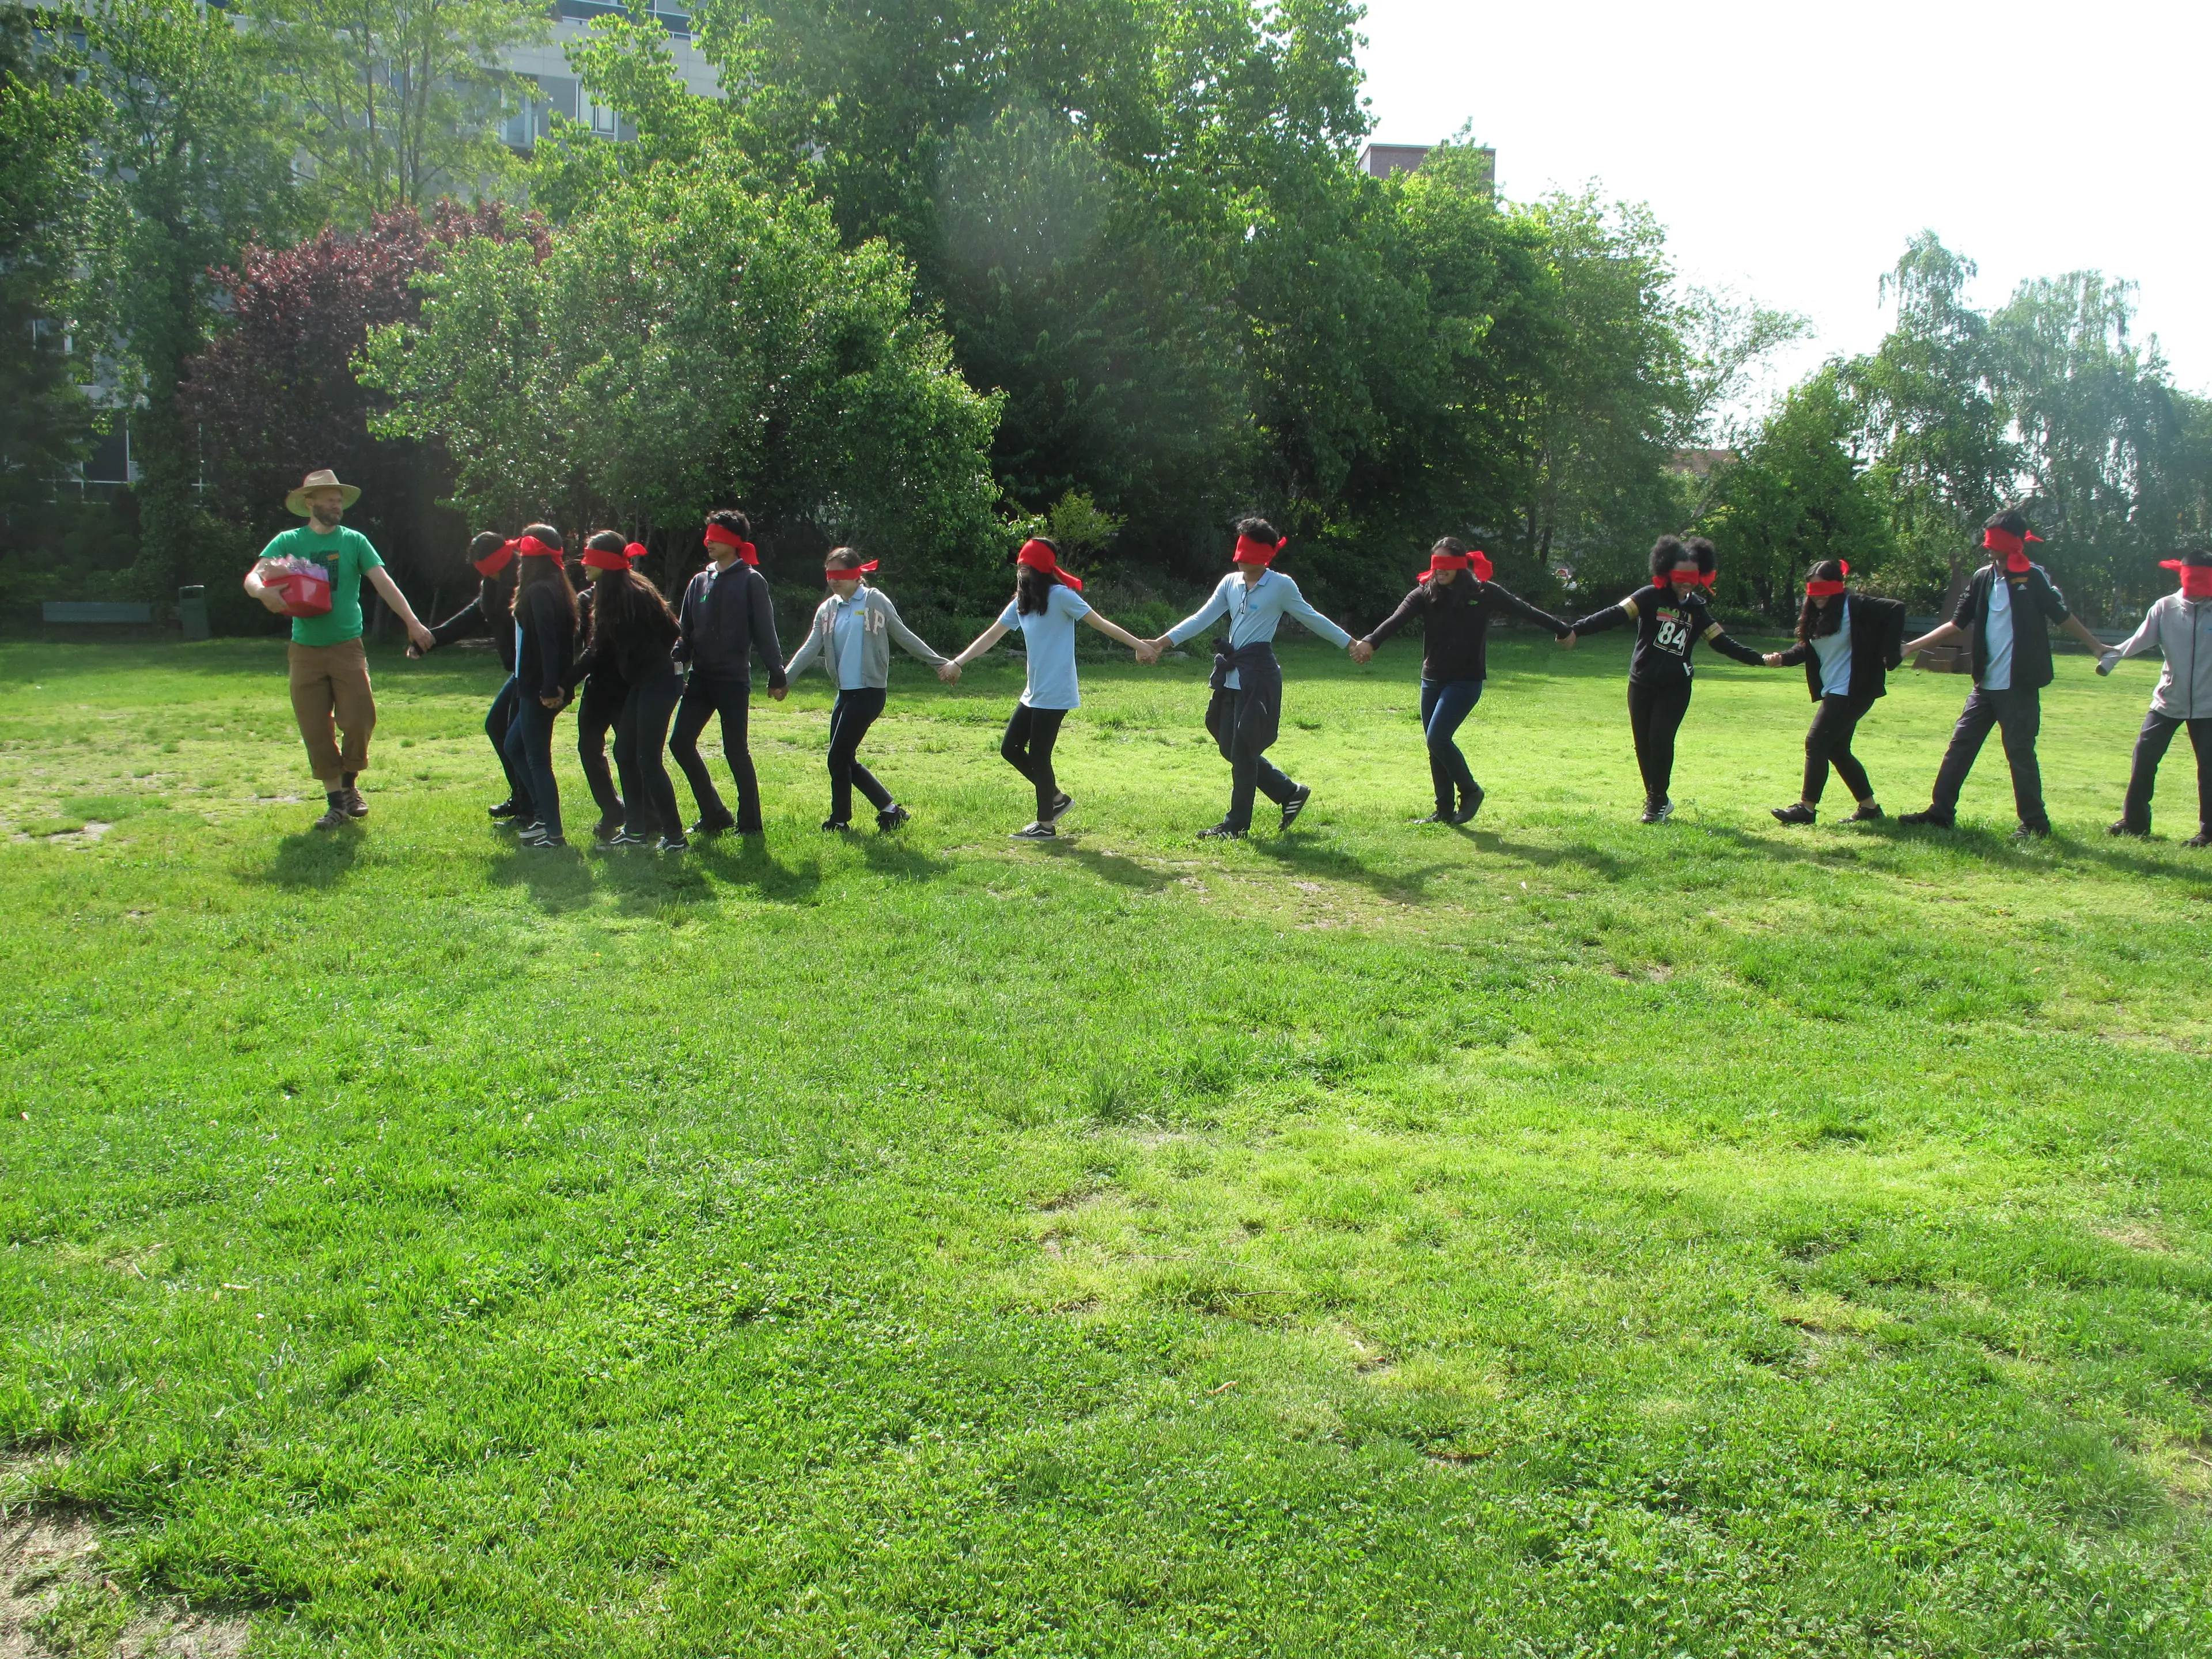 Photo of 12 kids holding hands and walkgin in a park wearing red headbands and being led by Doug.